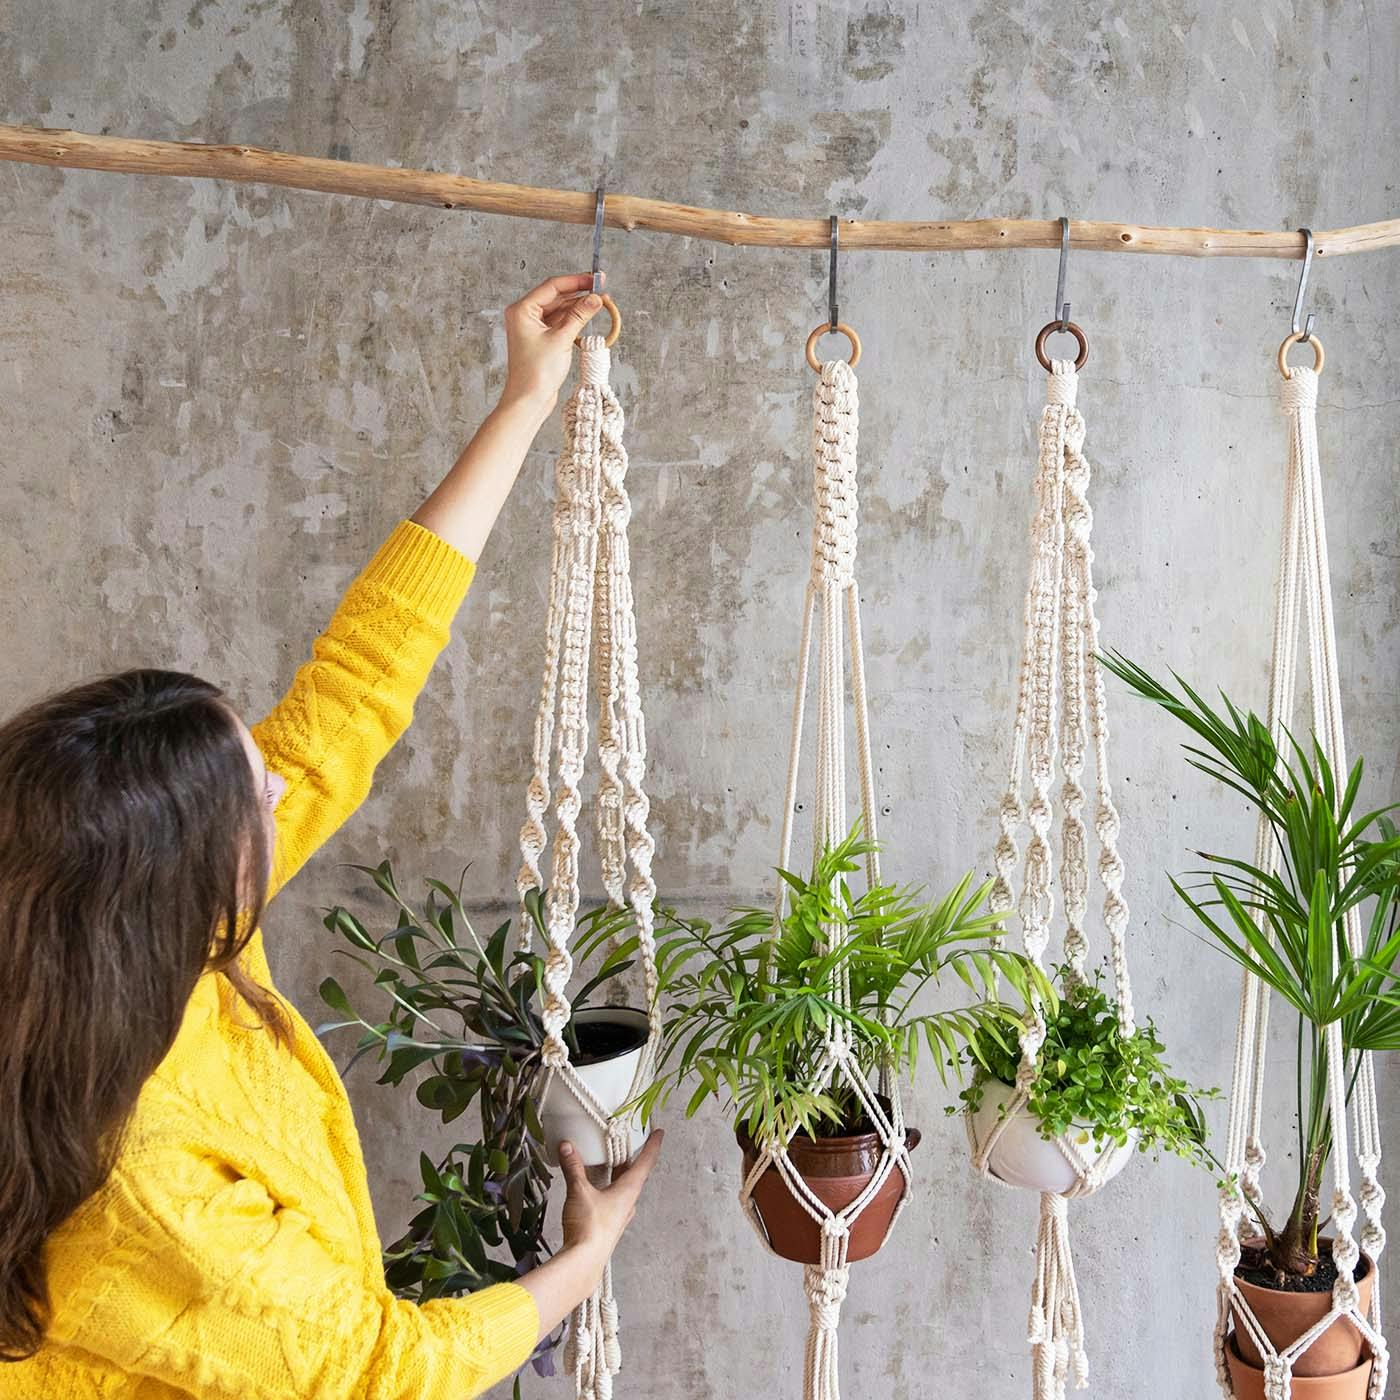 A woman hanging plants in a home